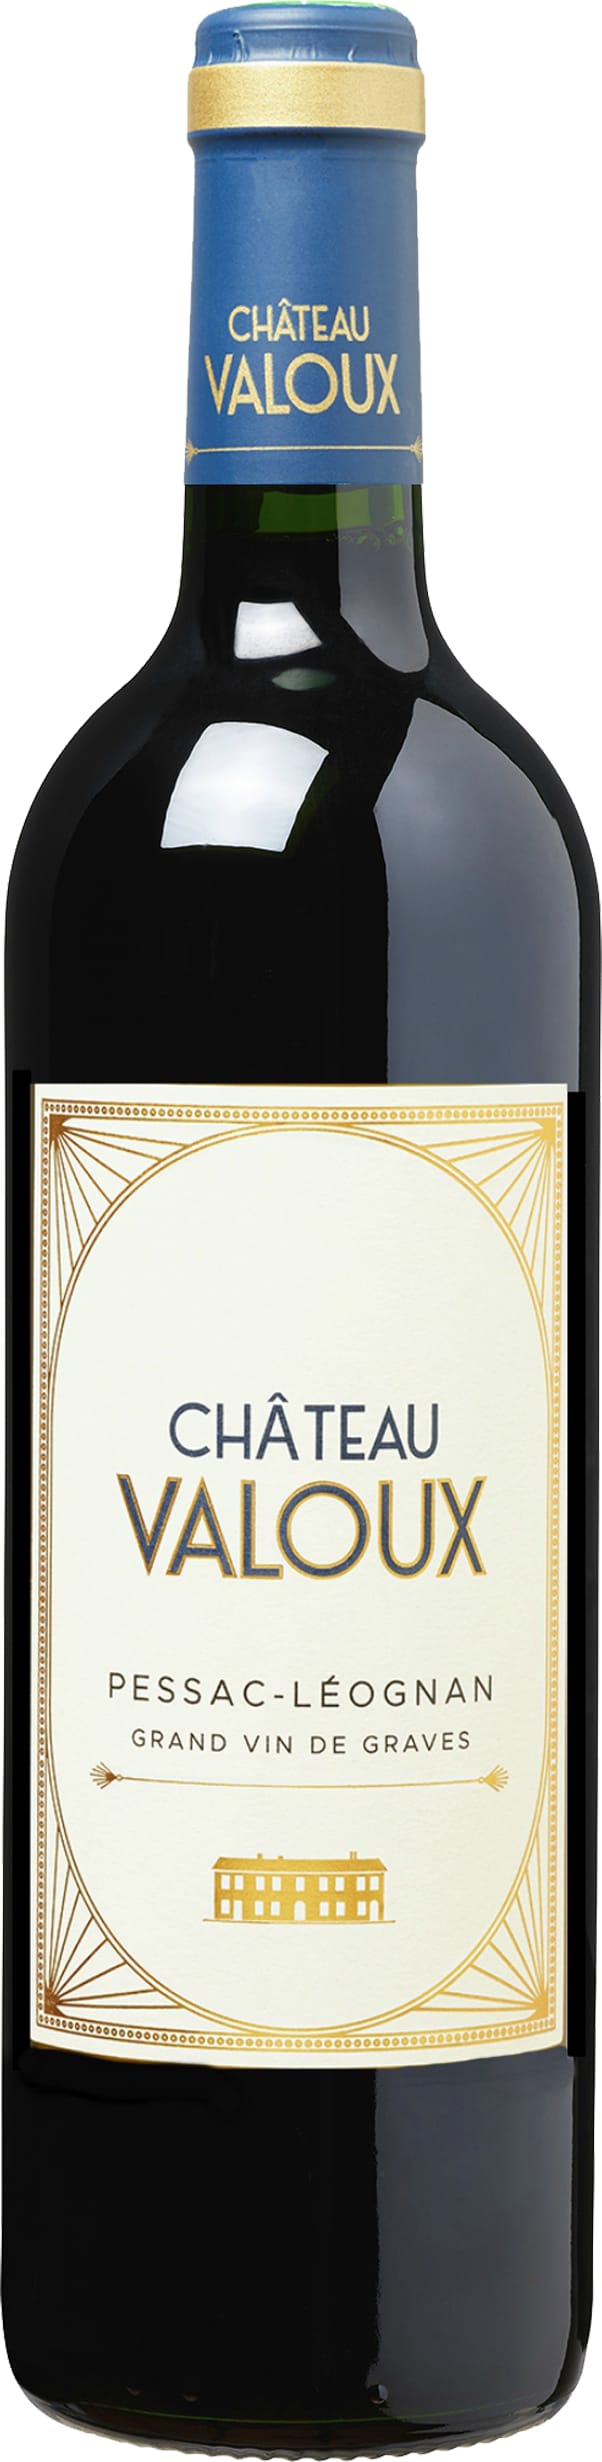 Chateau Valoux Pessac-Leognan 2019 75cl - Buy Chateau Valoux Wines from GREAT WINES DIRECT wine shop